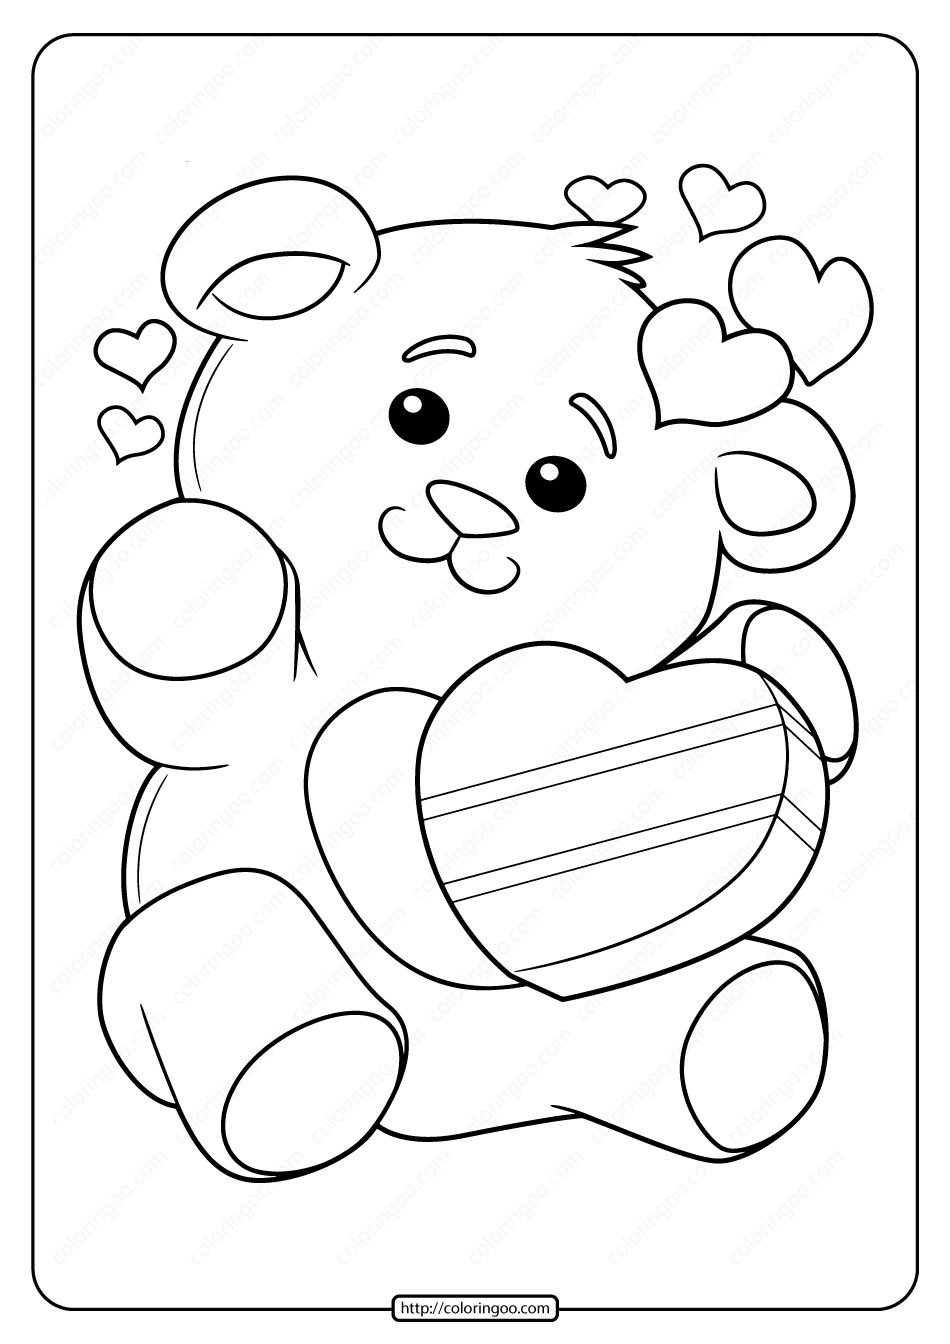 Free Printable Valentine's Day Bear Pdf Coloring Page